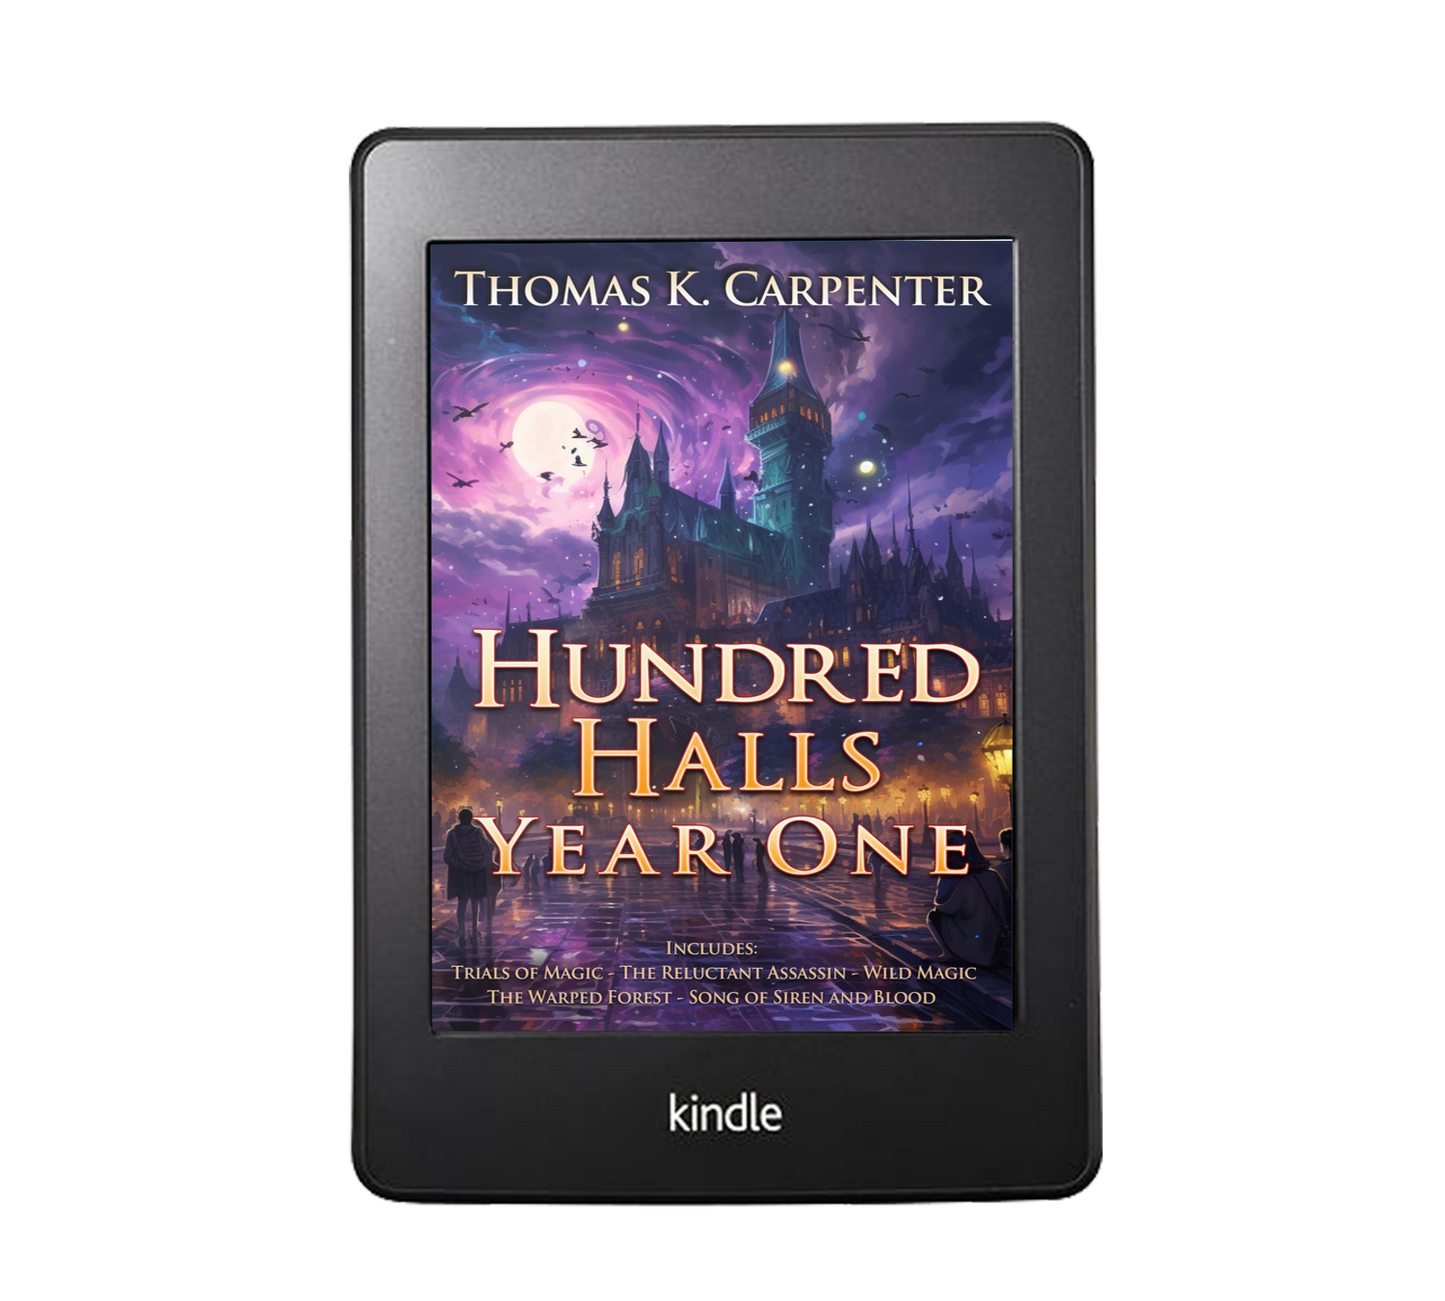 The Hundred Halls Year One